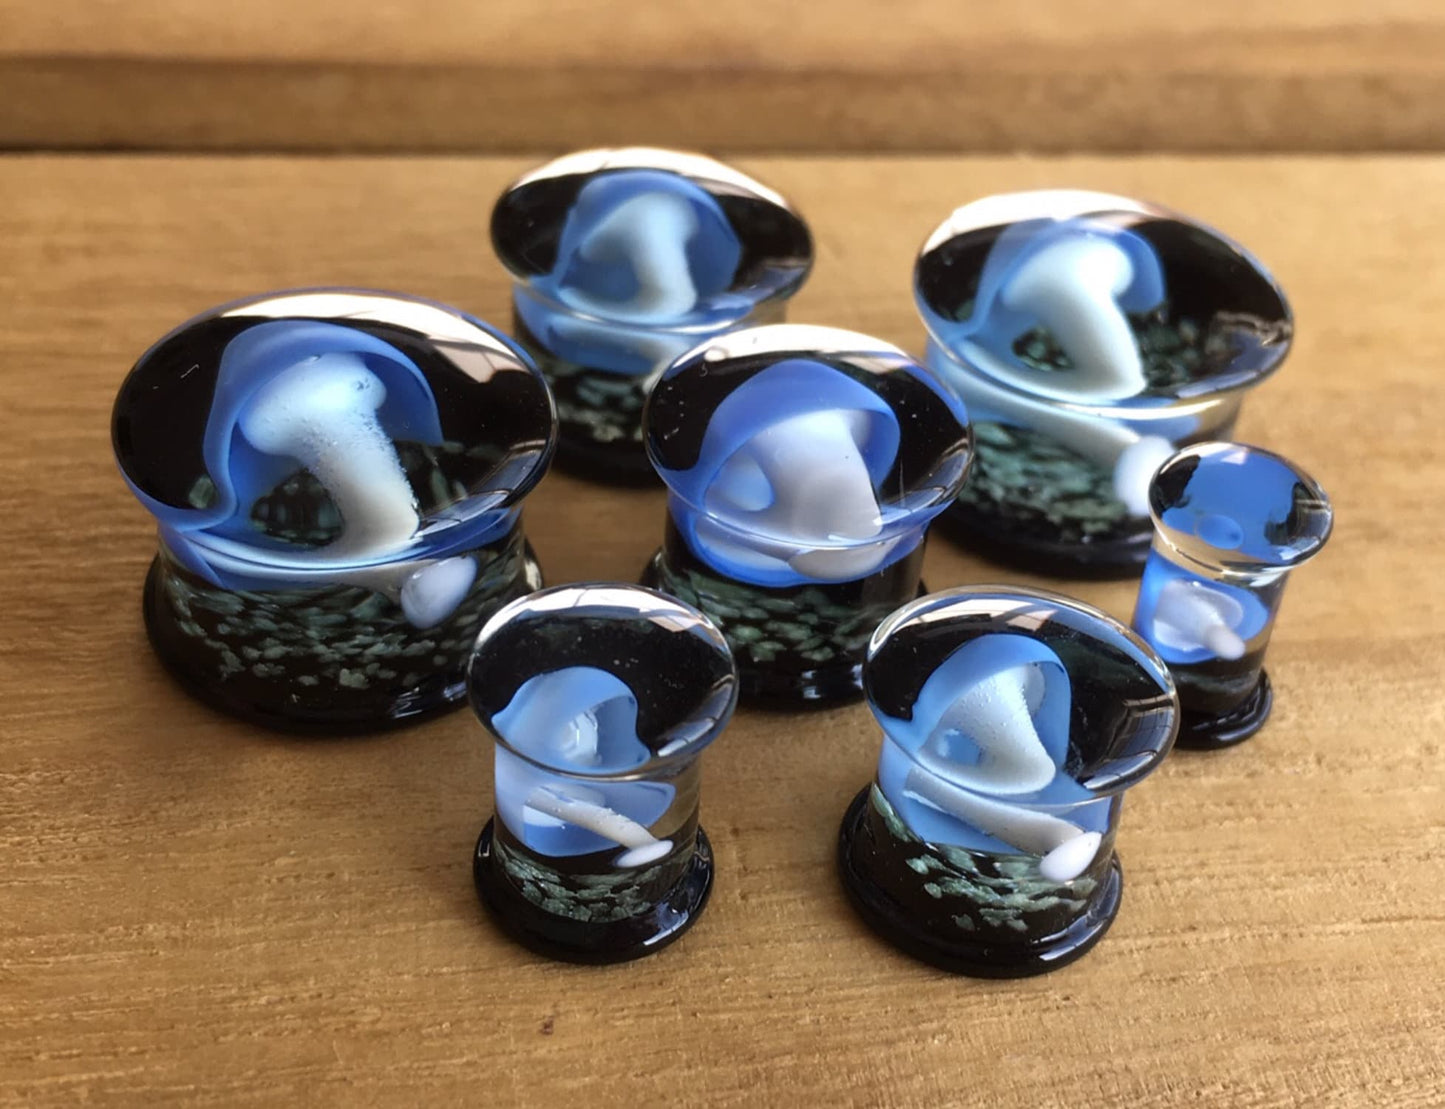 PAIR of Glow in the Dark Floating Mushroom Pyrex Glass Double Flare Plugs - Gauges 2g (6mm) through 5/8" (16mm) available!